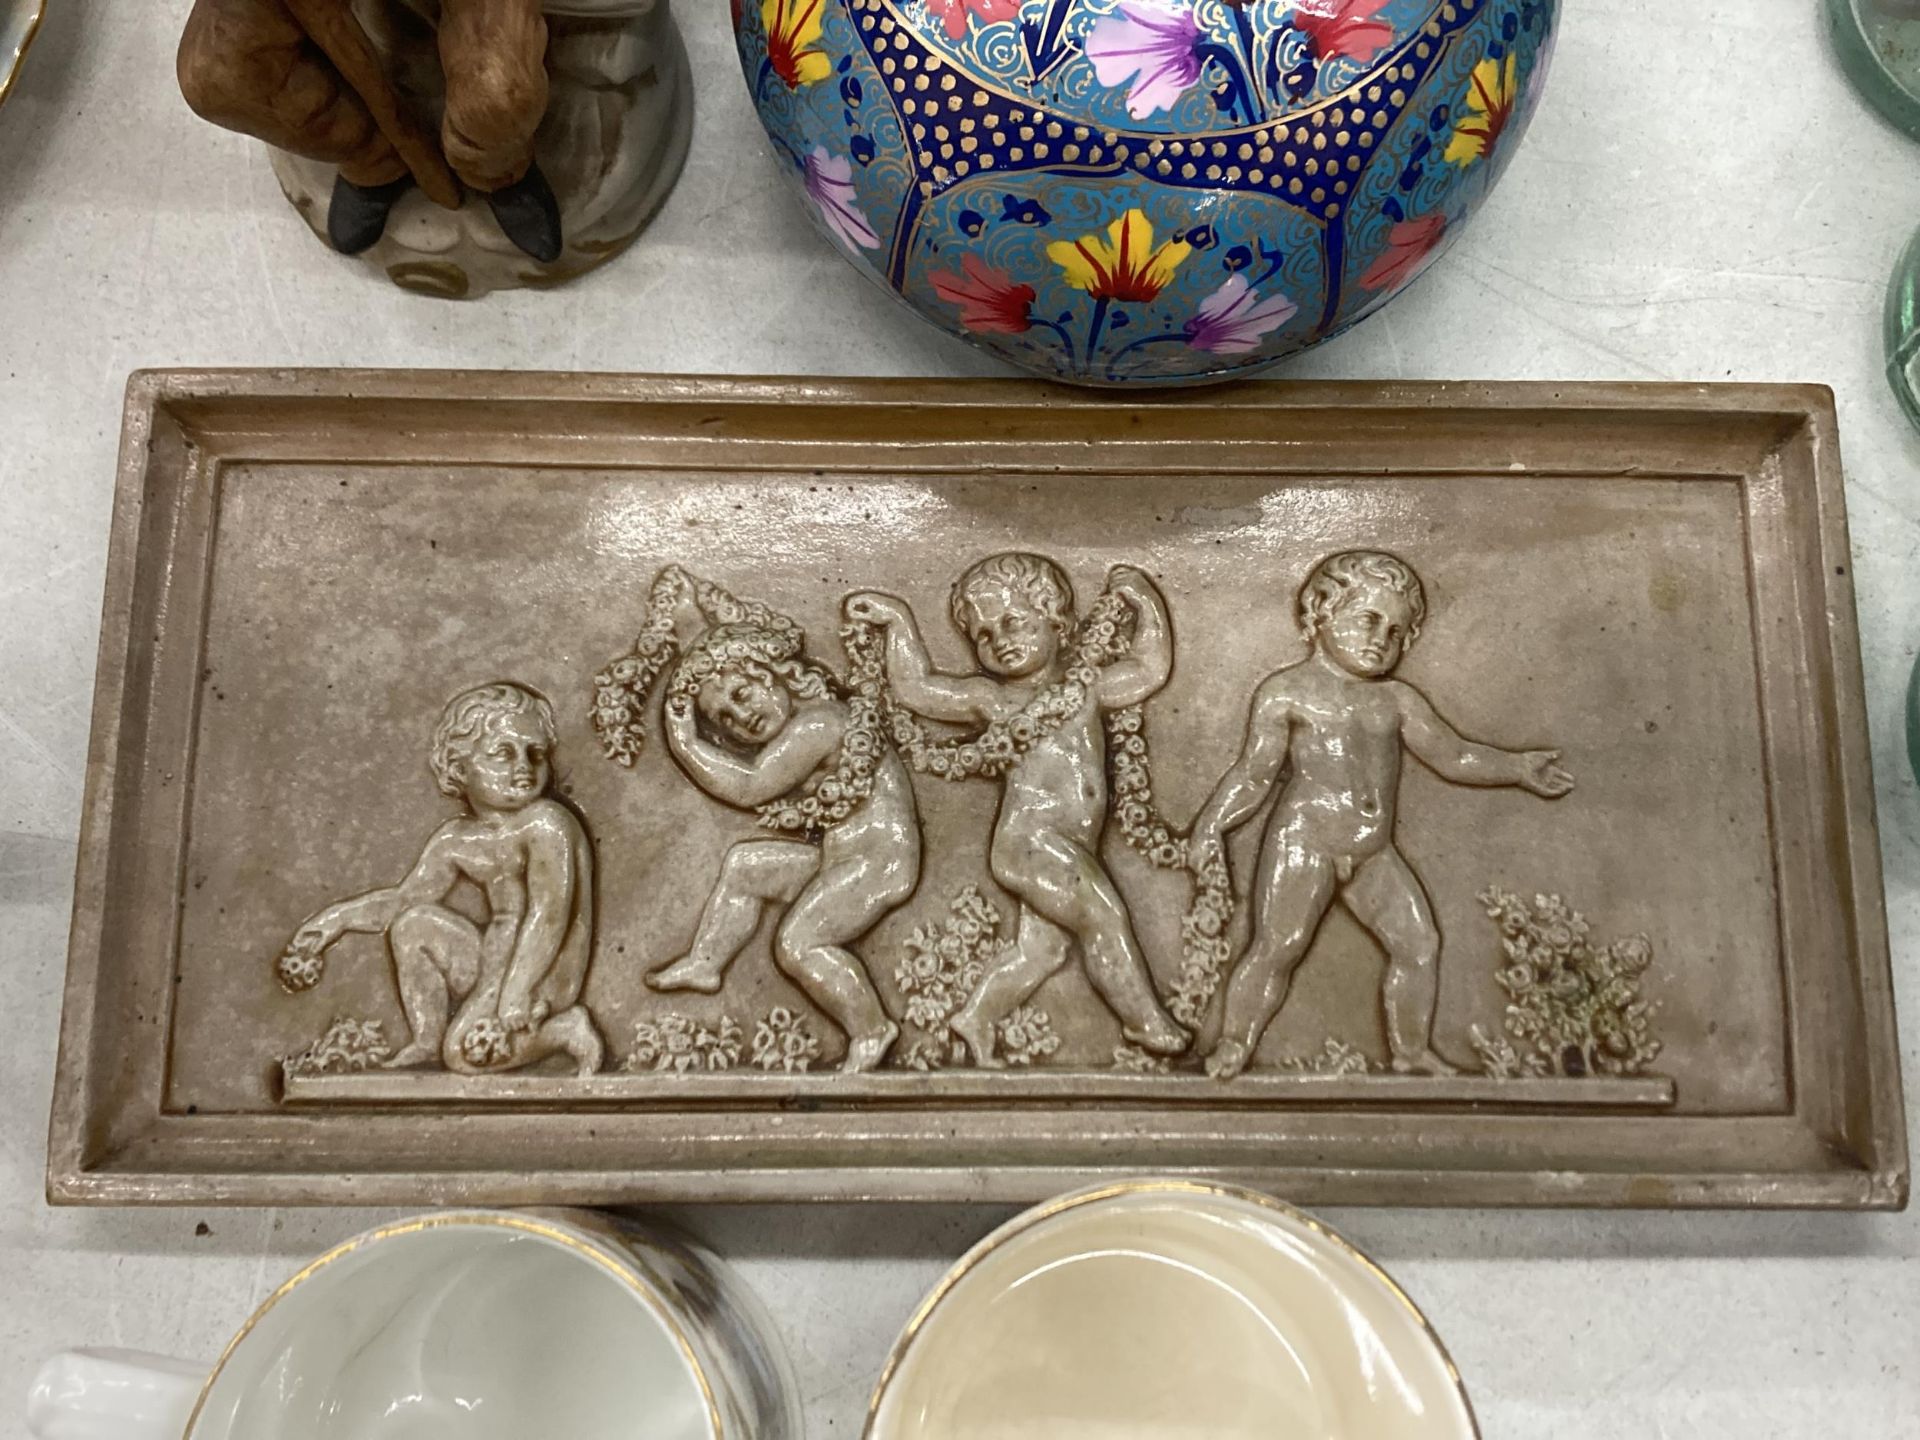 A CERAMIC LOT TO INCLUDE A WALL PLAQUE WITH CHERUBS, OVAL CLOISONNE STYLE TRINKET BOXES, - Image 4 of 5